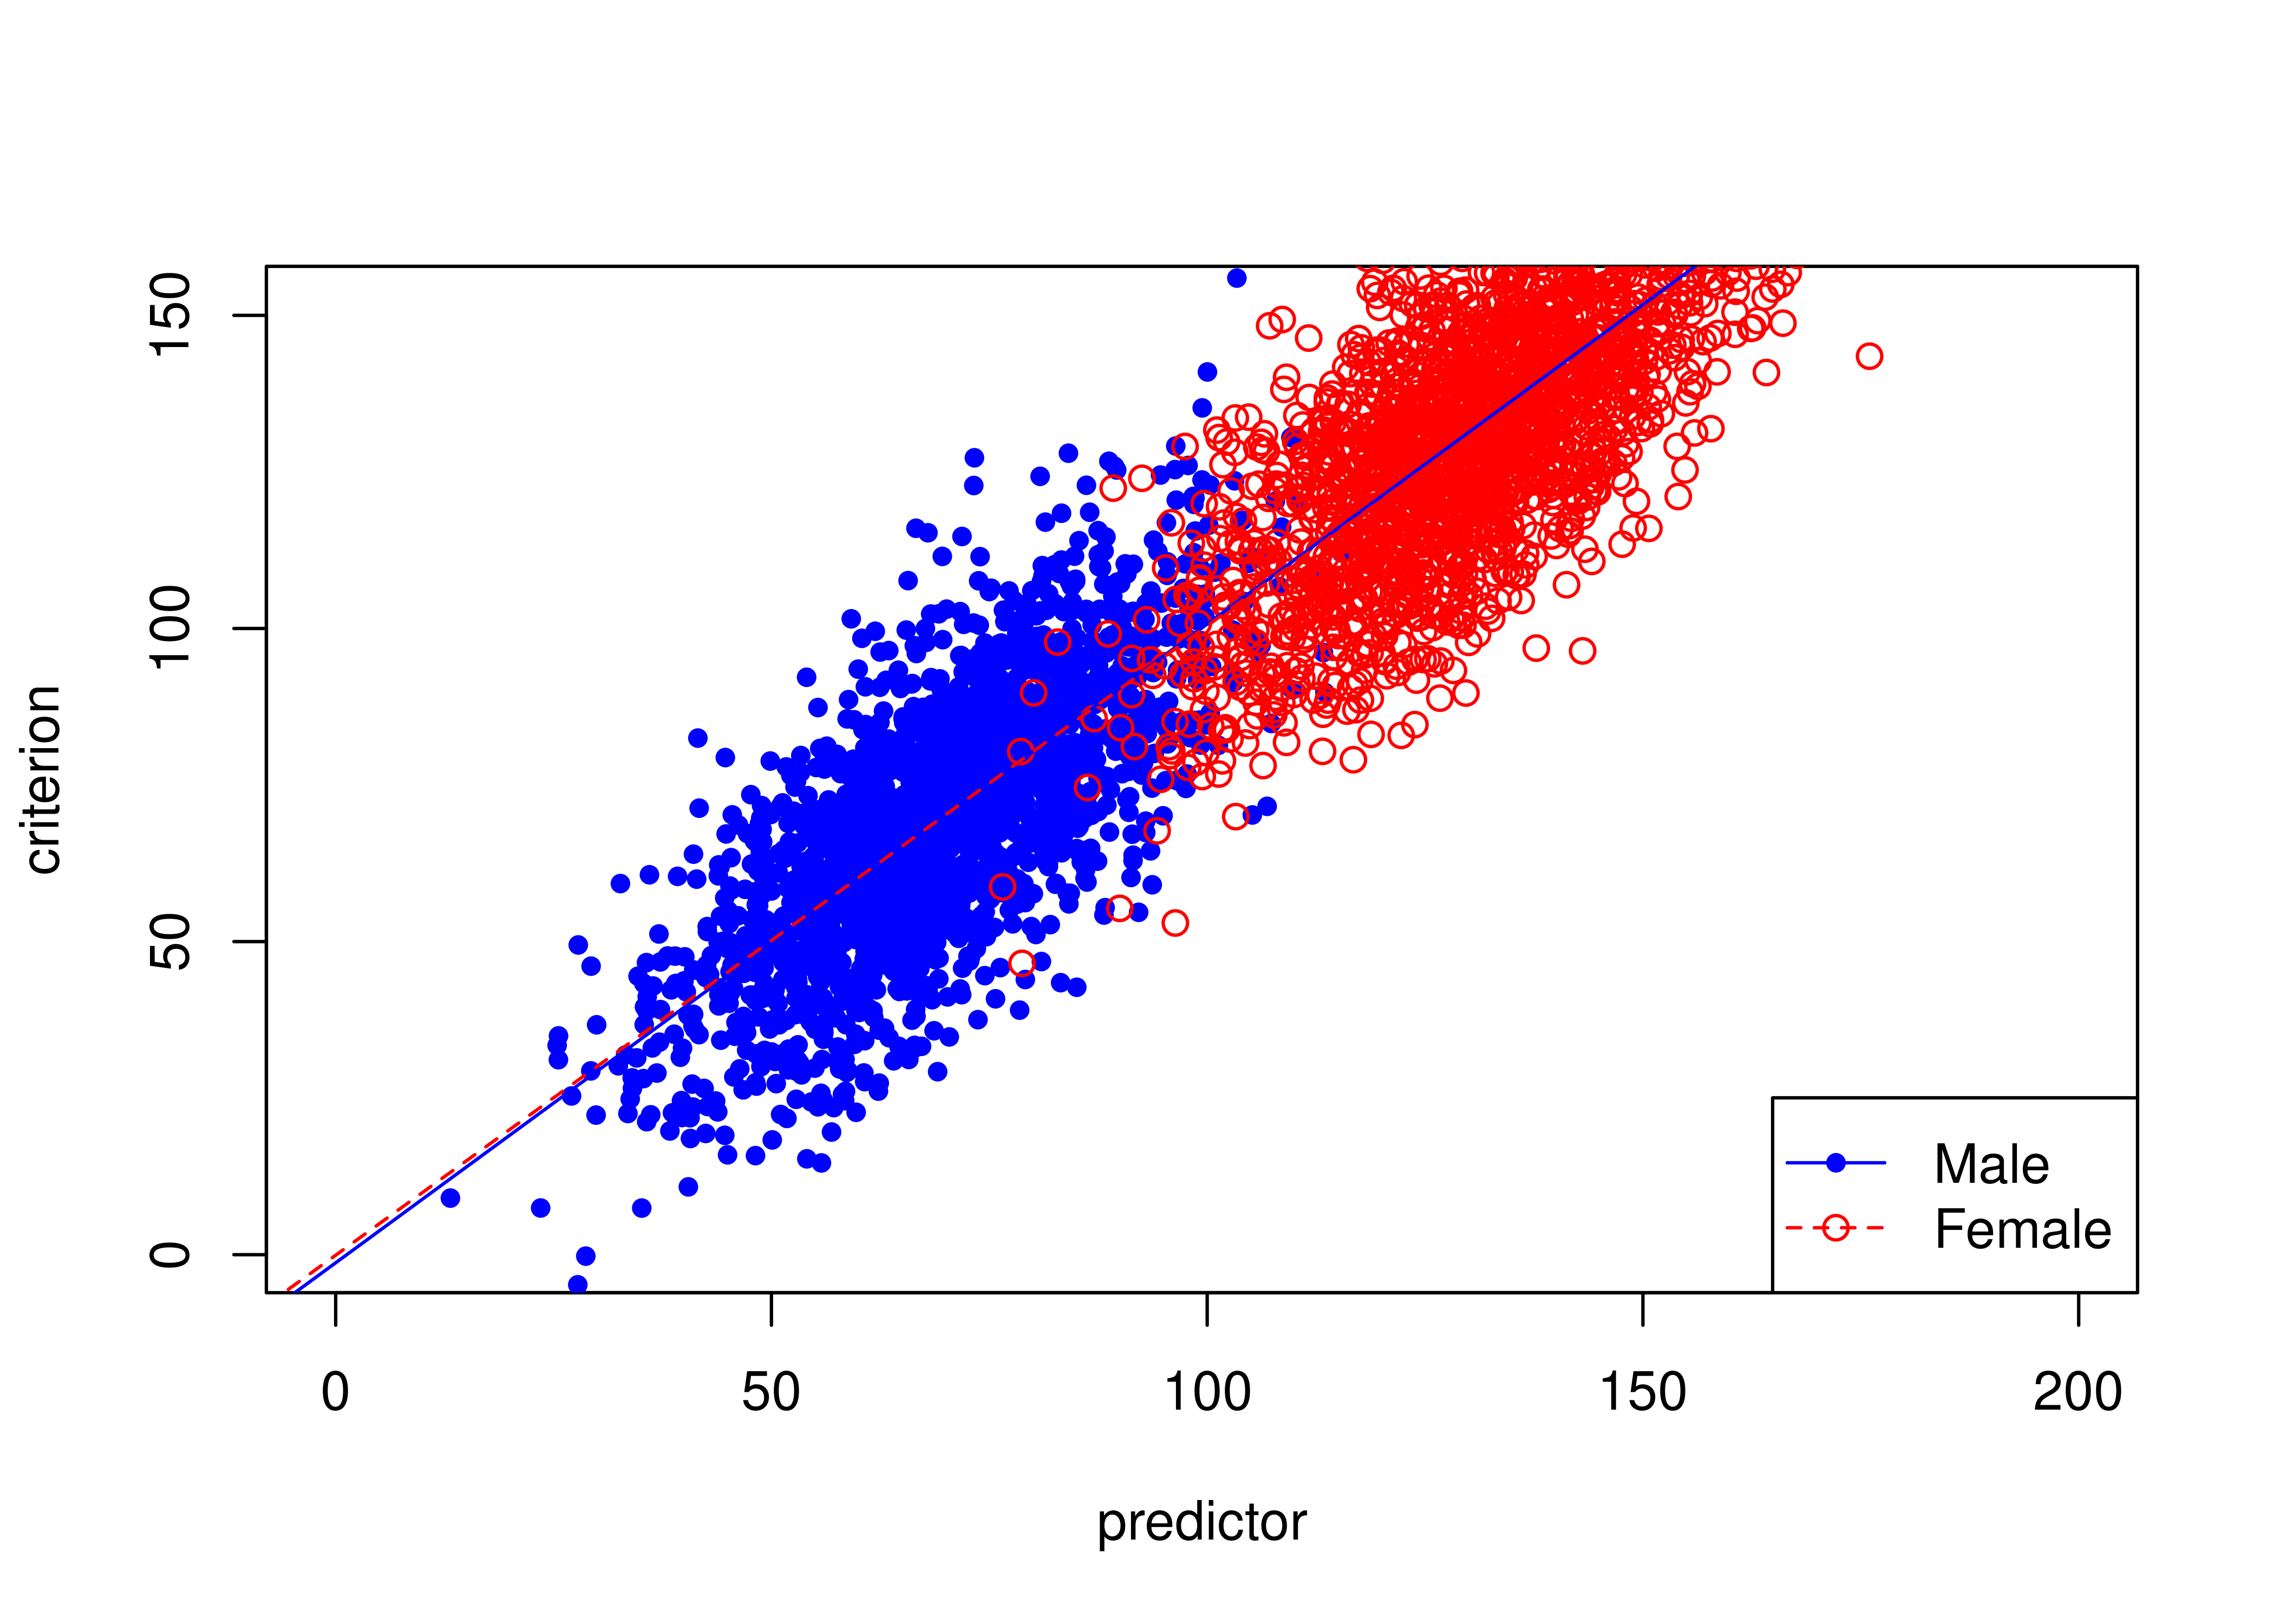 Unbiased Test Where Females Have Higher Means Than Males on Predictor and Criterion.